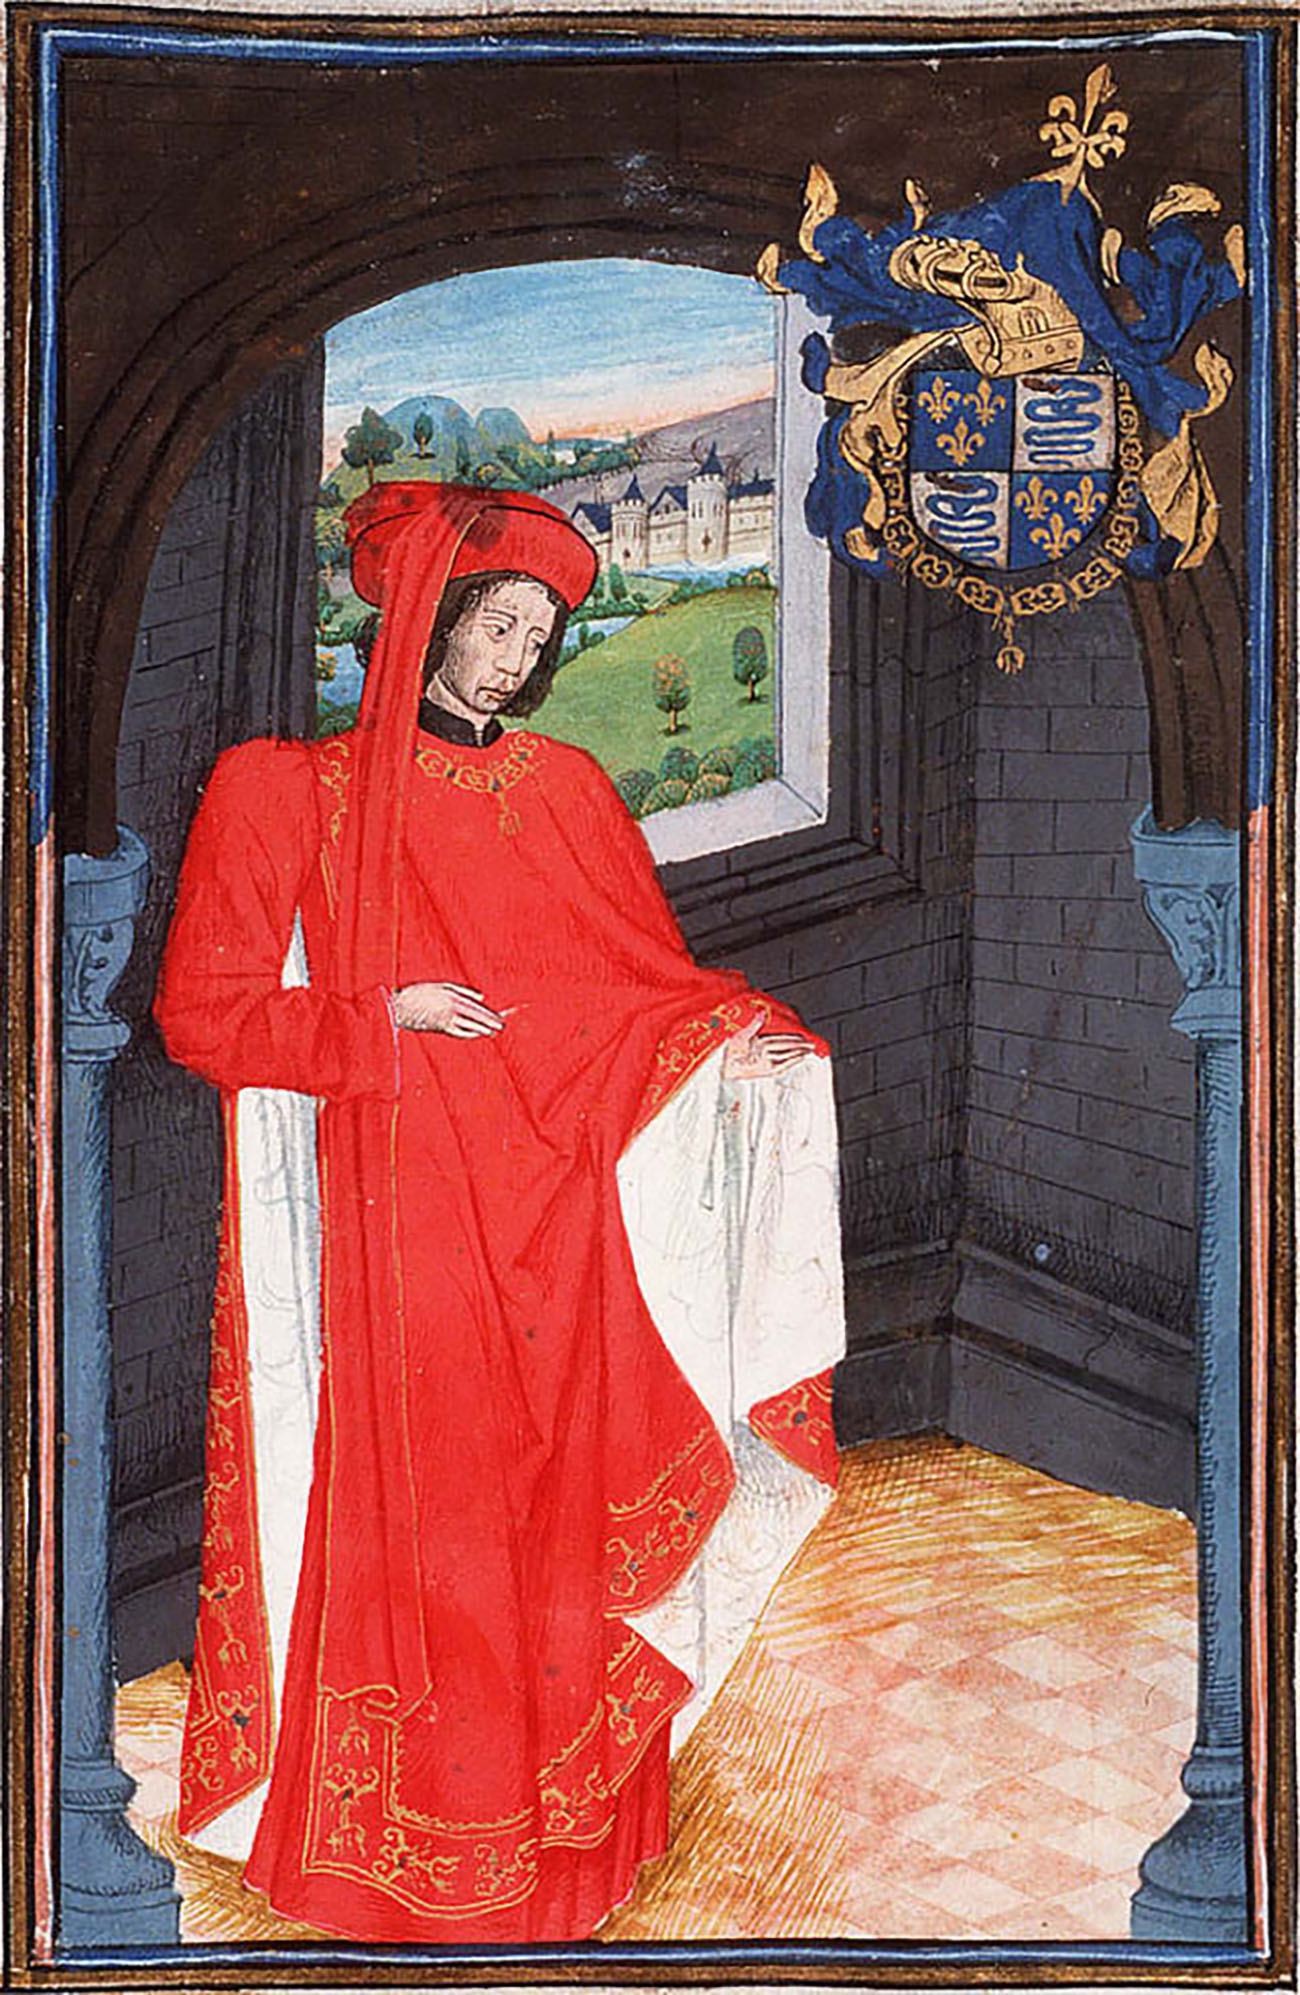 A painting of St. Valentine. The saint is dressed in red and is set against the medival background of a castle's tower.